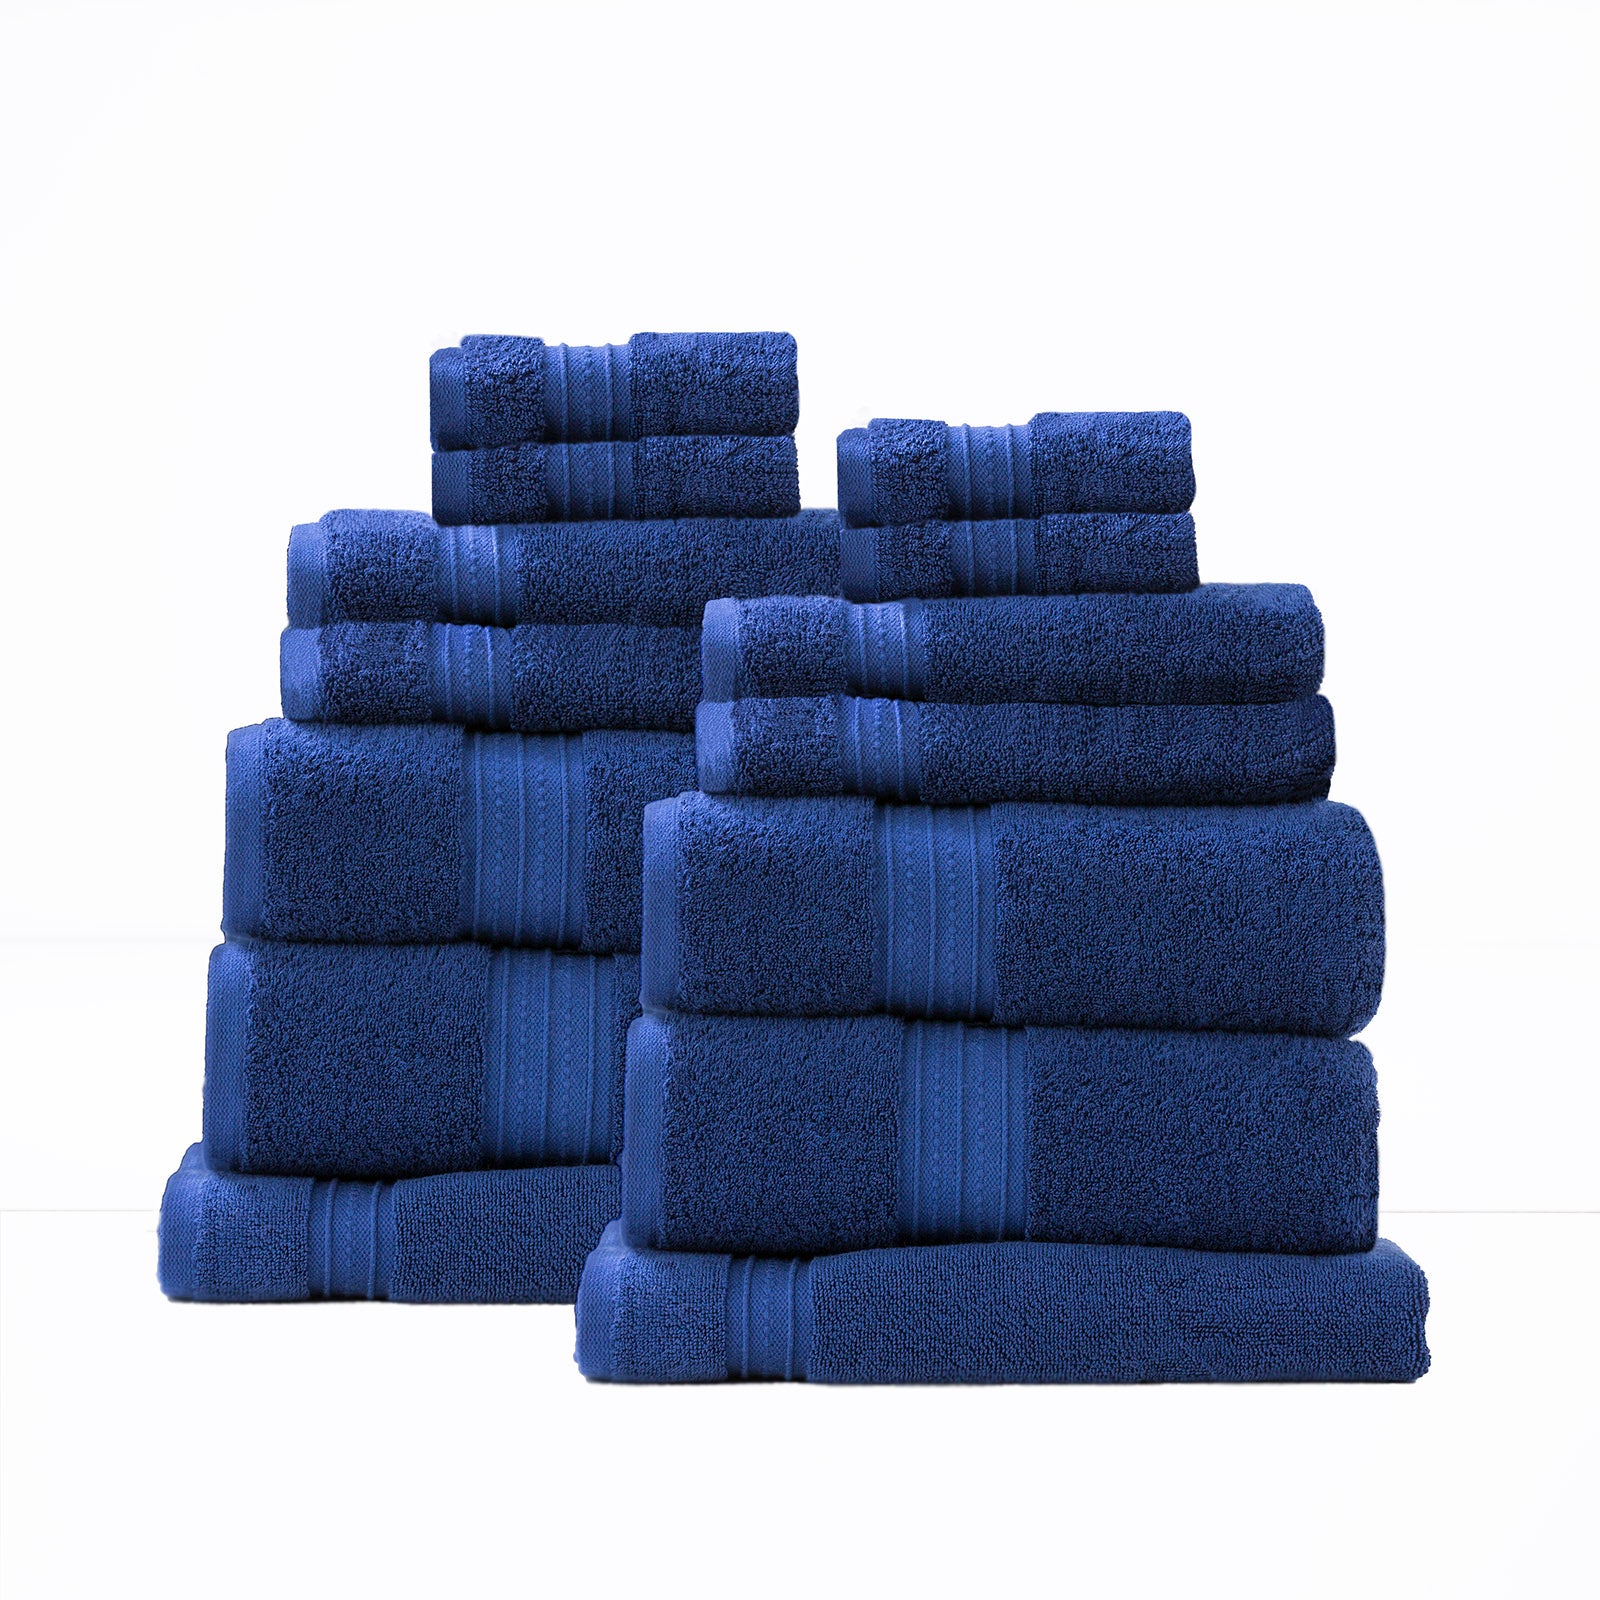 Renee Taylor Brentwood 650 GSM Low Twist 14 Piece Royal